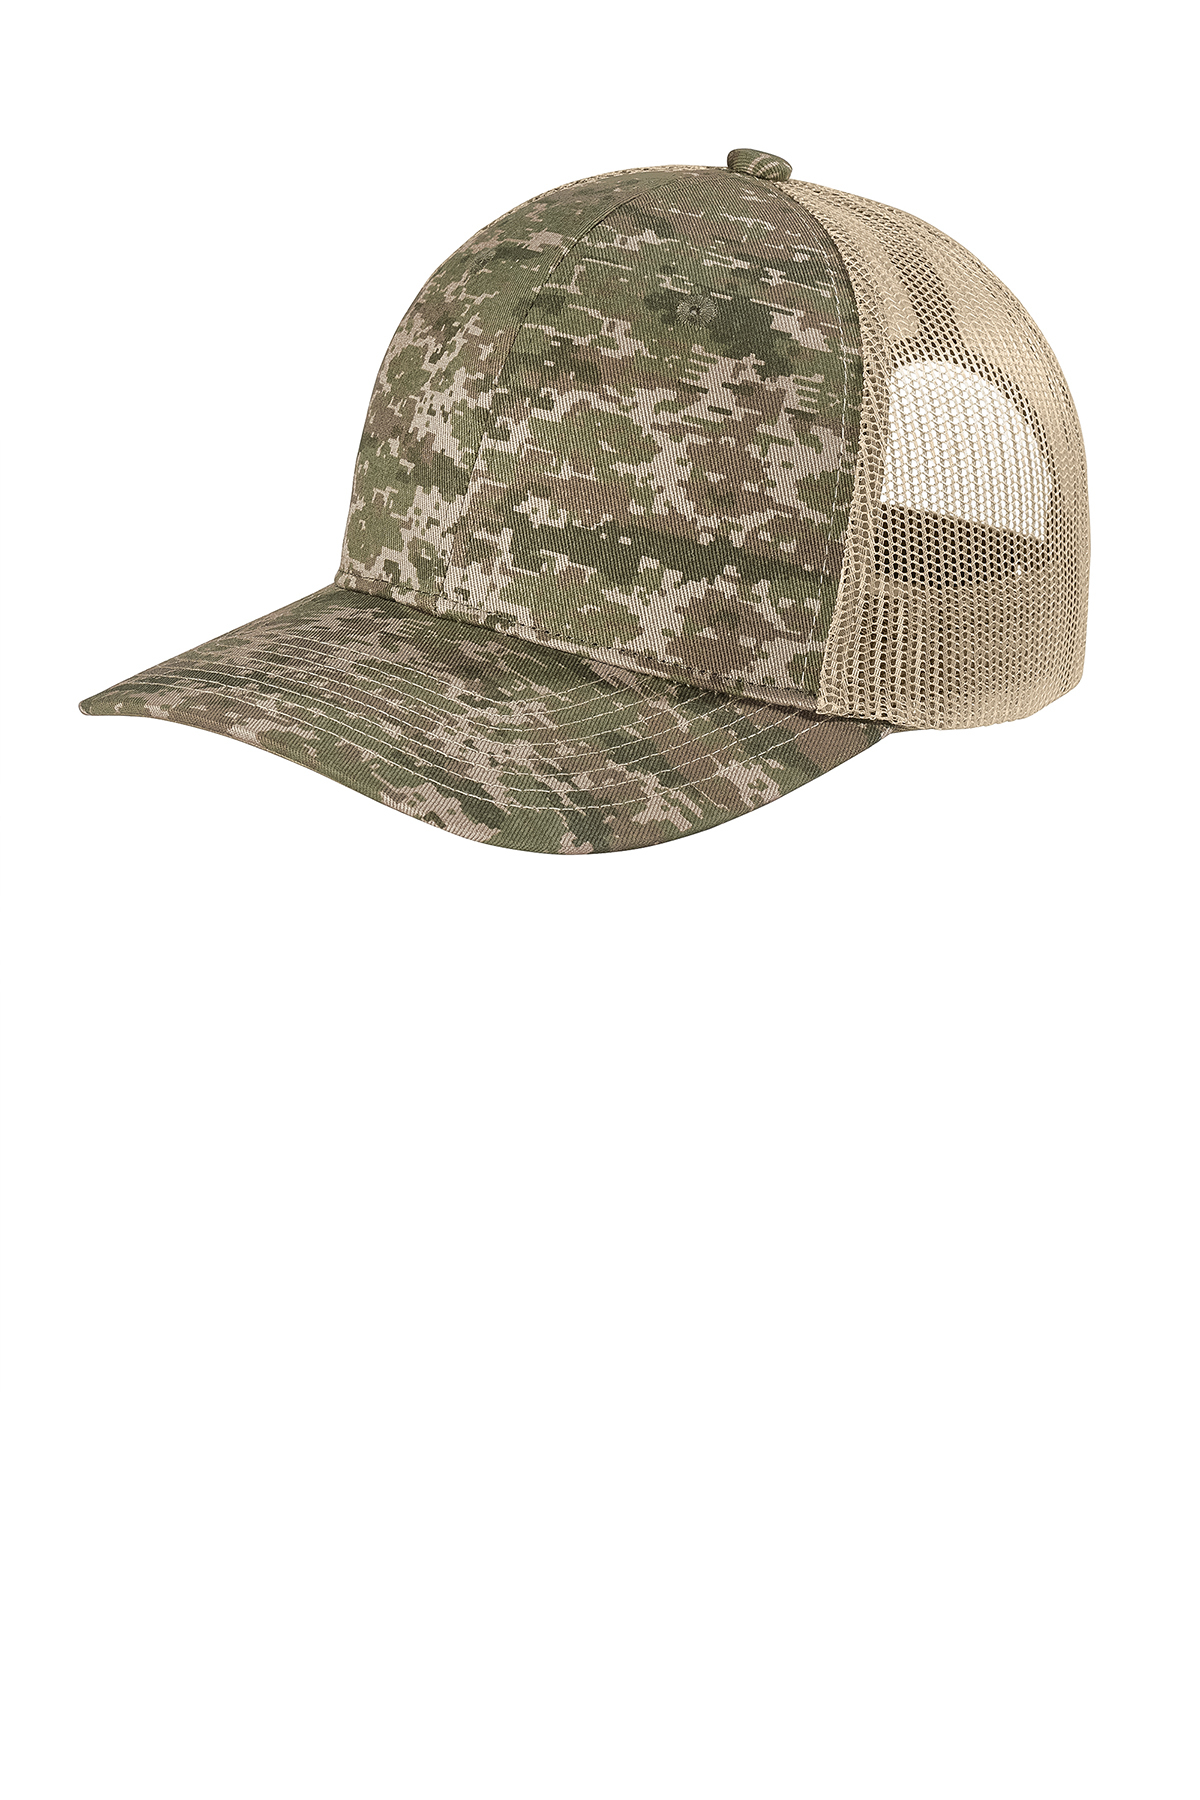 click to view Olive Drab Green Digi/ Coyote Brown